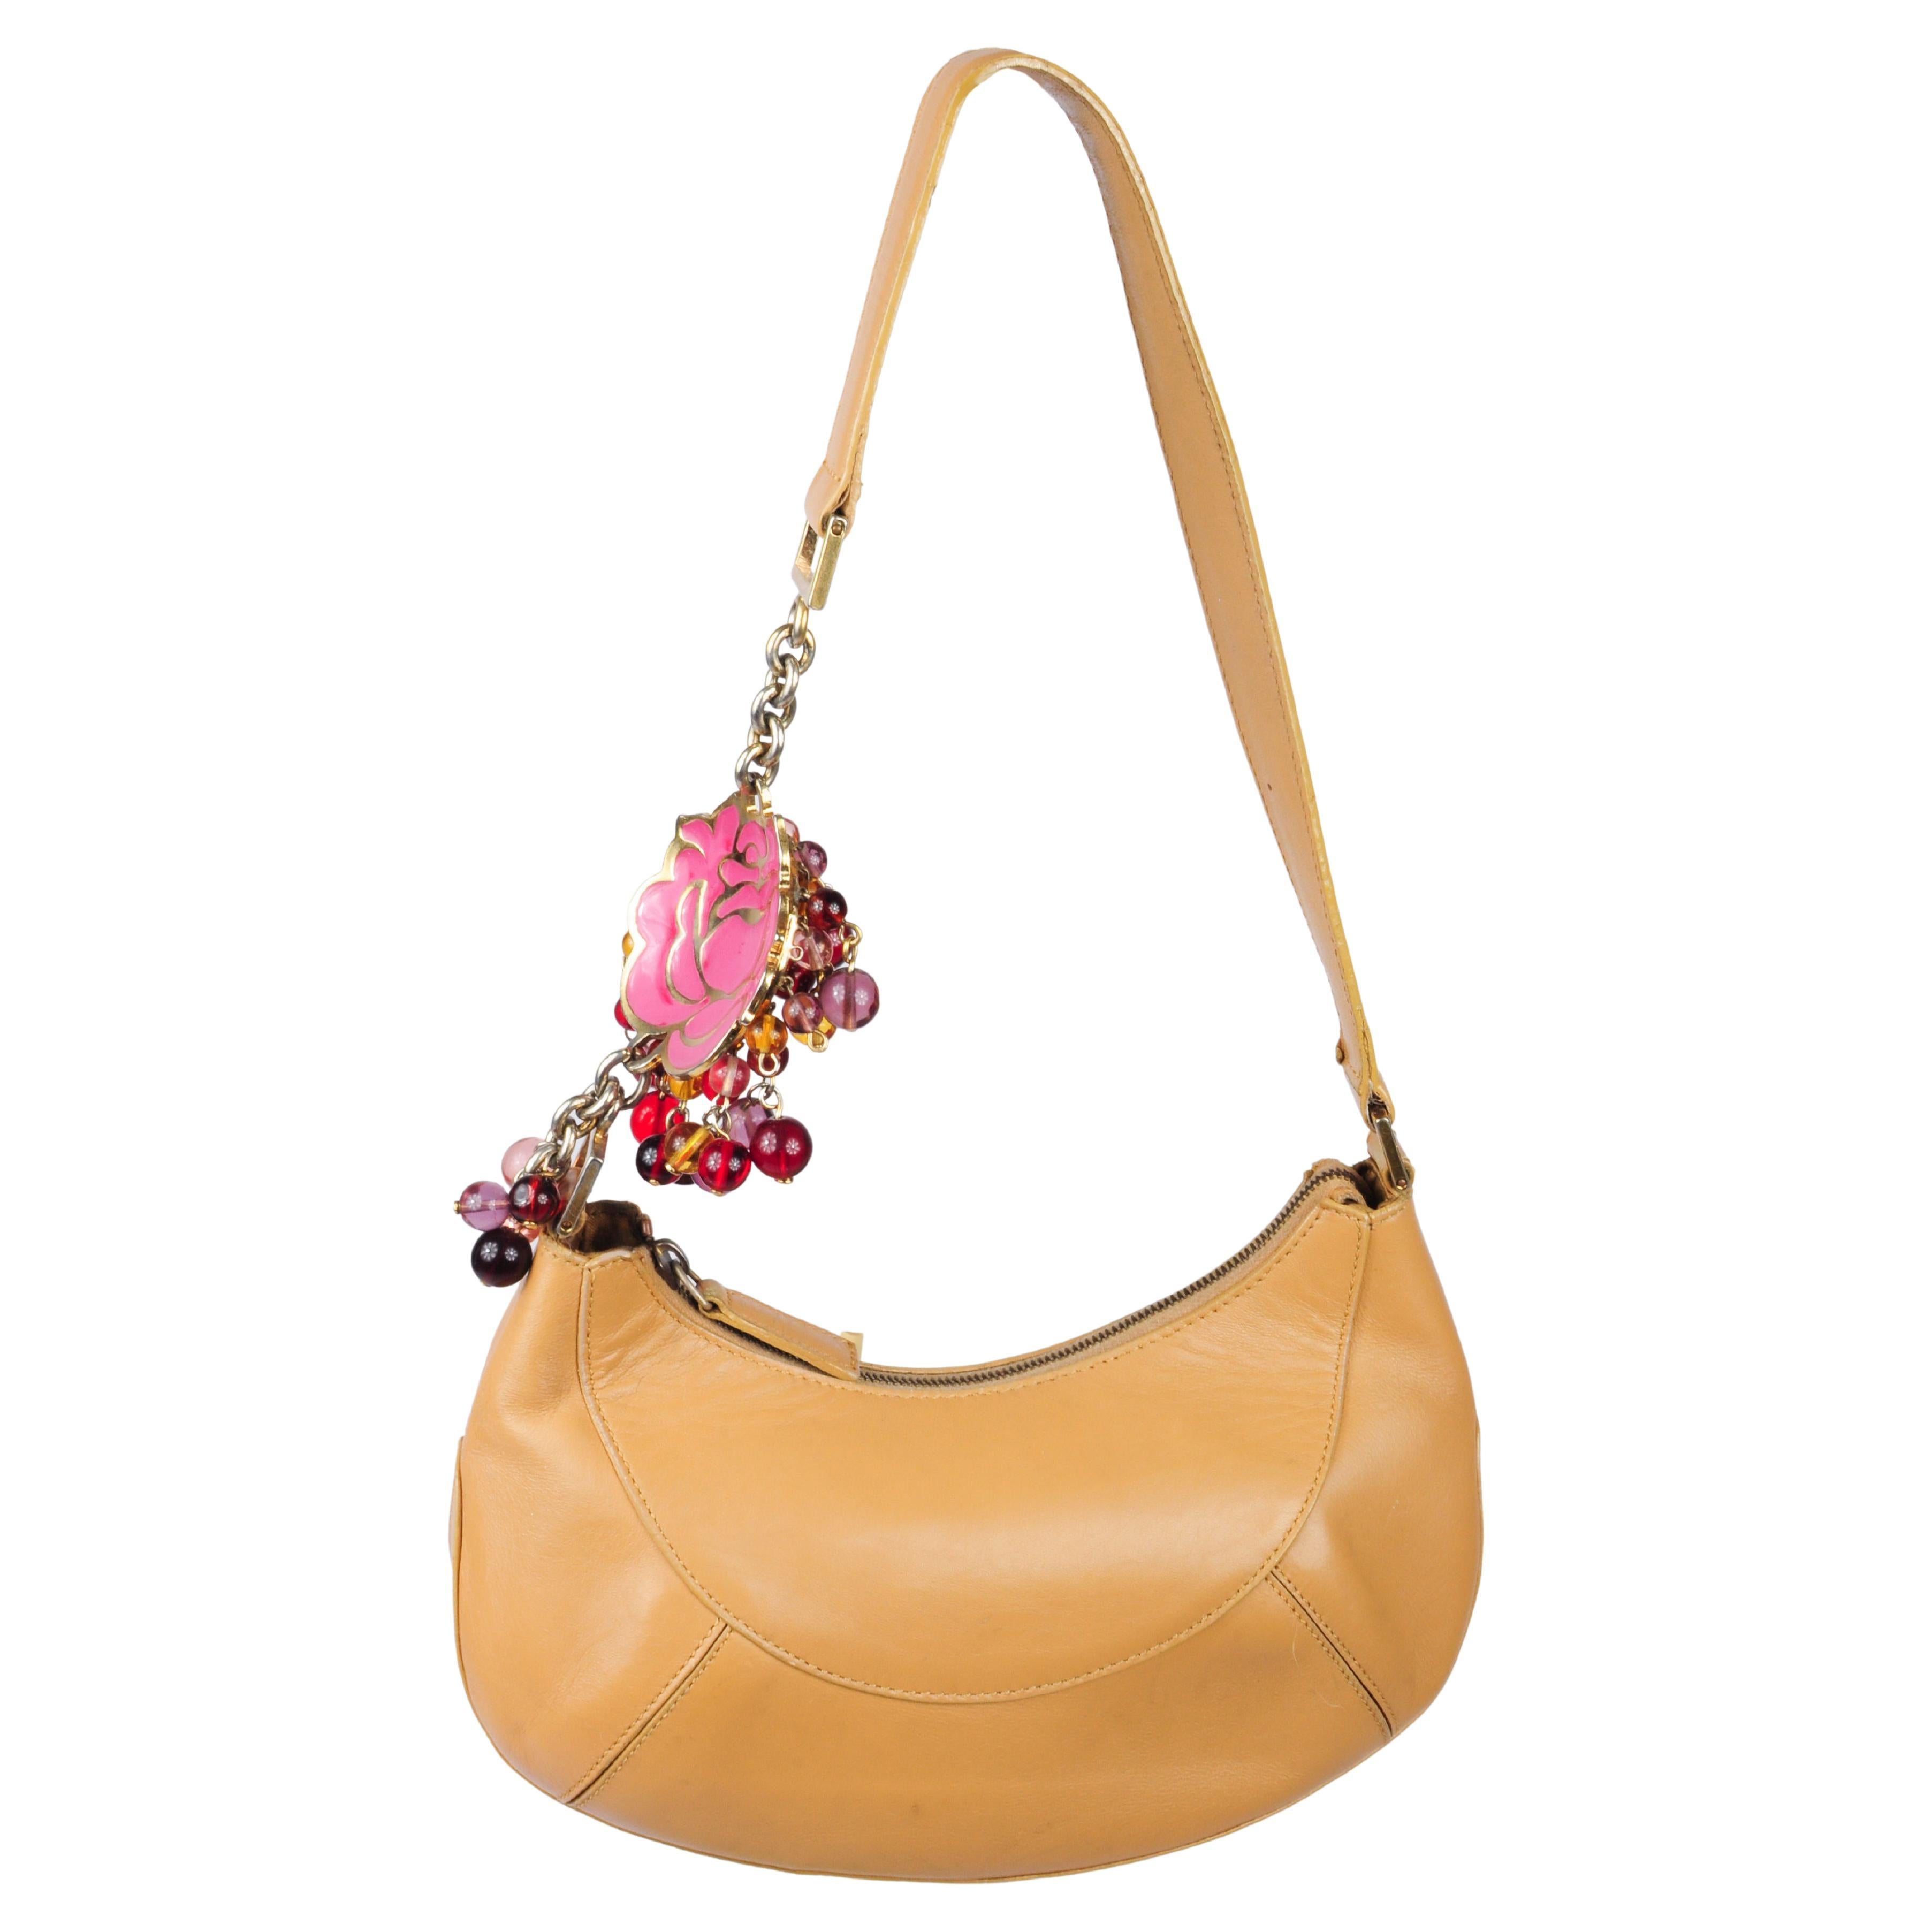 Gianni Versace Mini Shoulder Bag with Camellia Flower Glass Beads Details 2000s